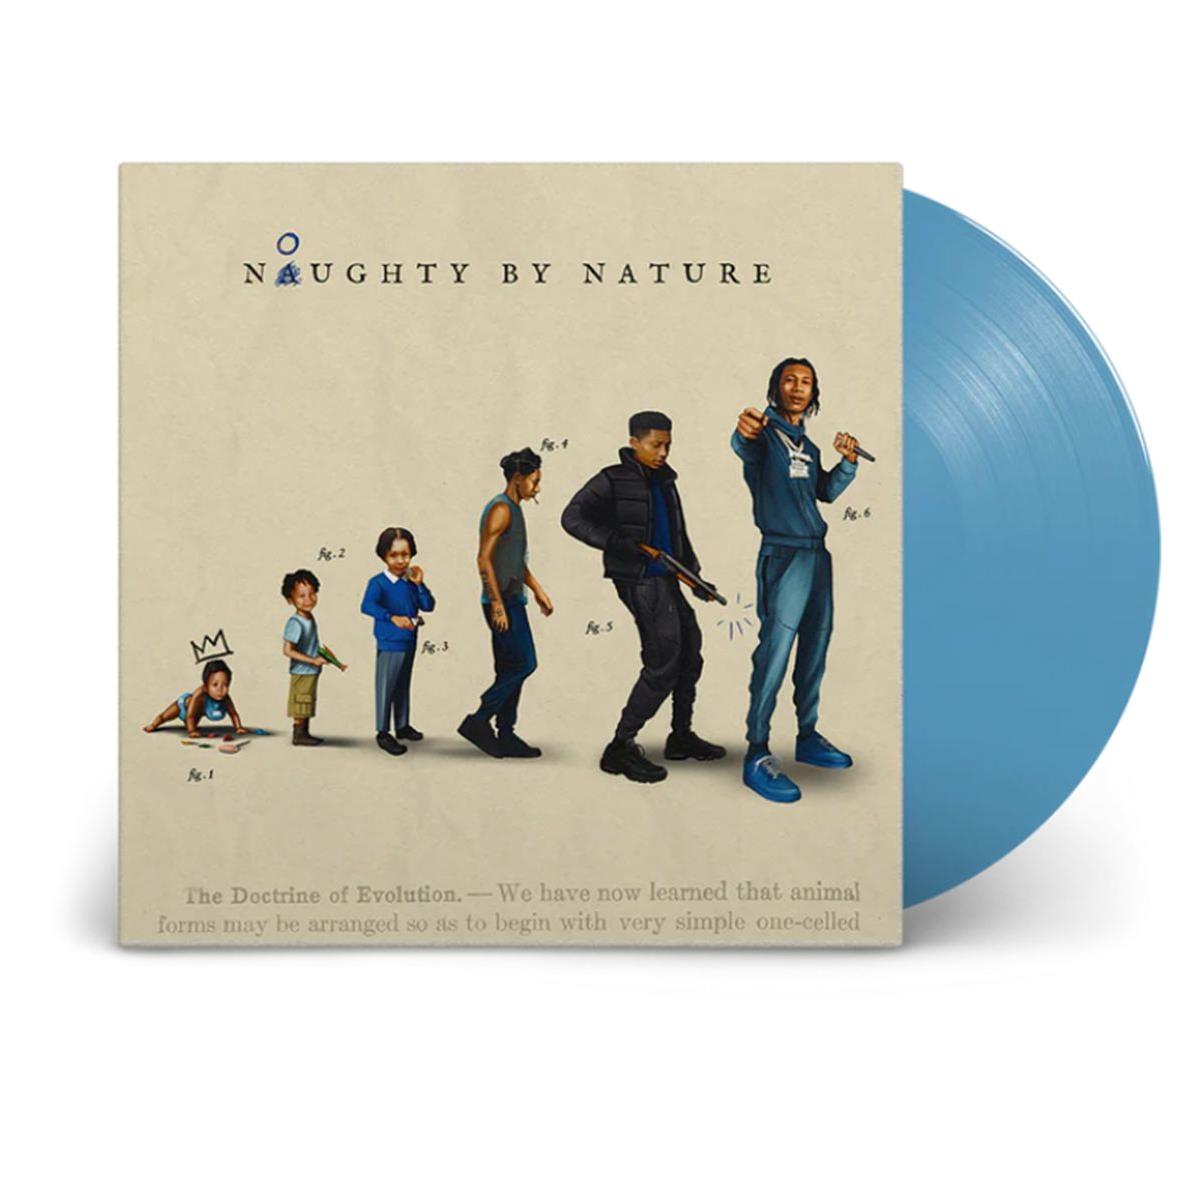 noughty by nature (vinyl)